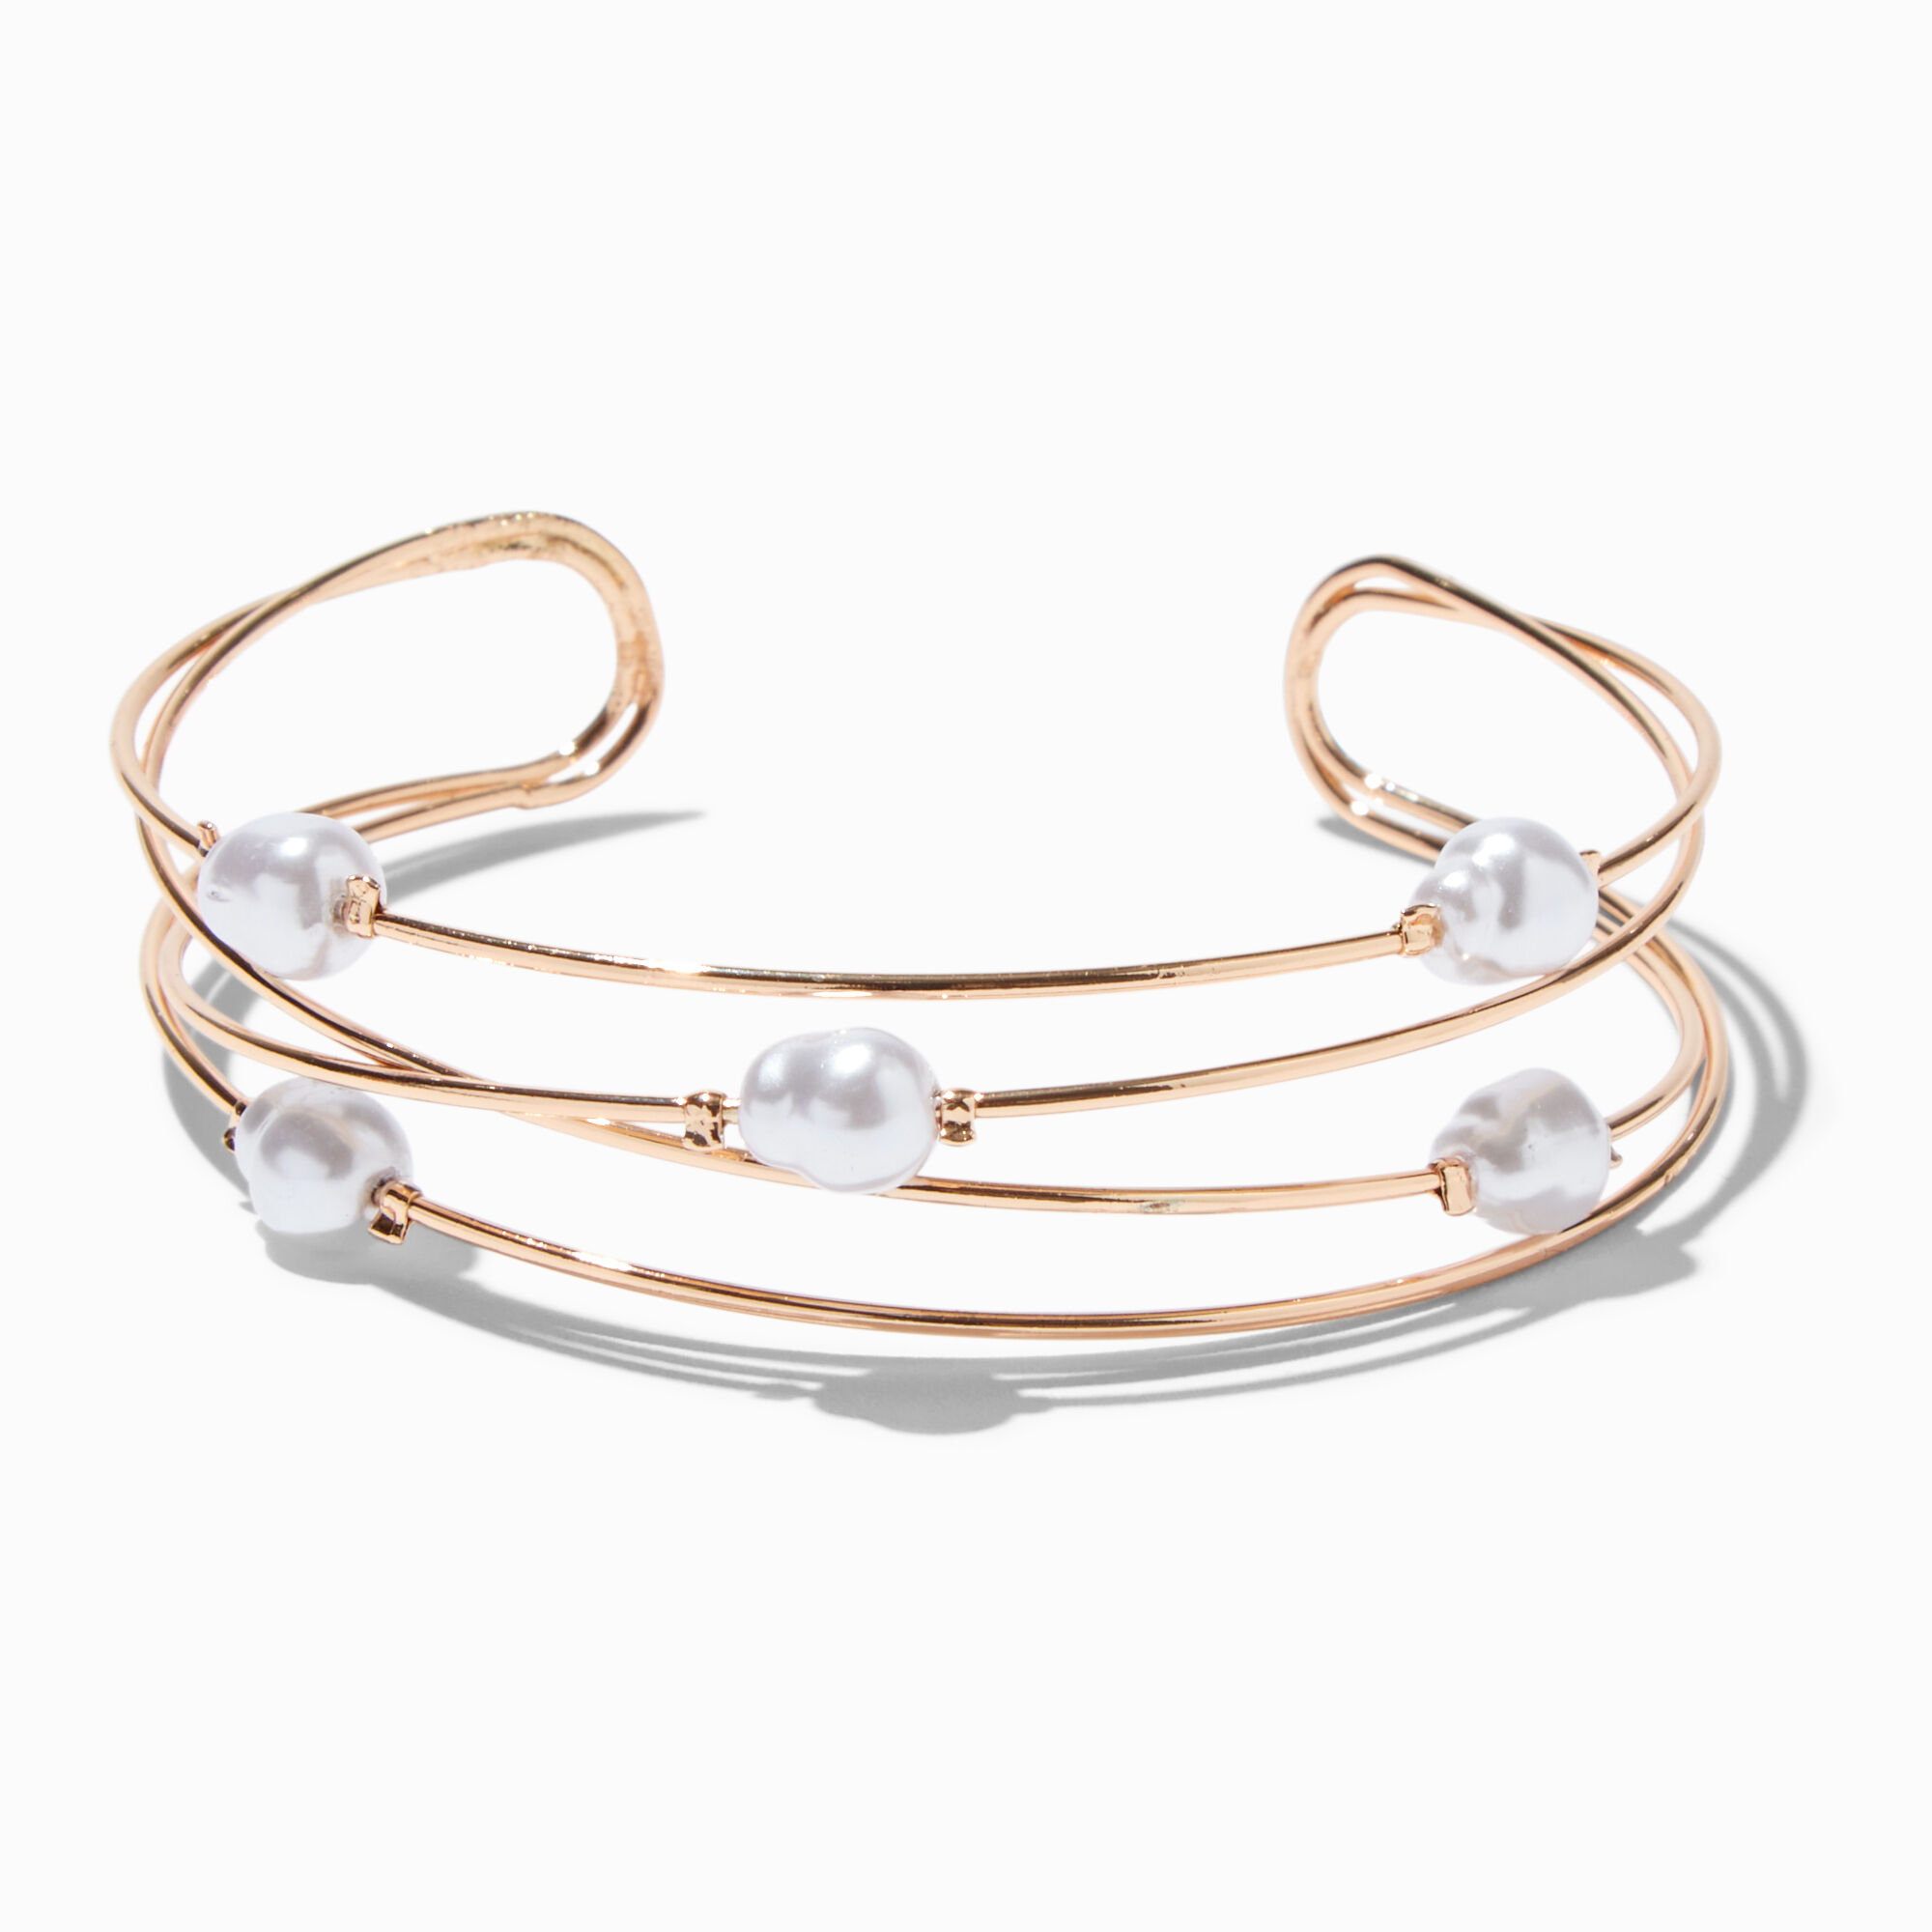 View Claires Tone Pearl Station Wire Cuff Bracelet Gold information